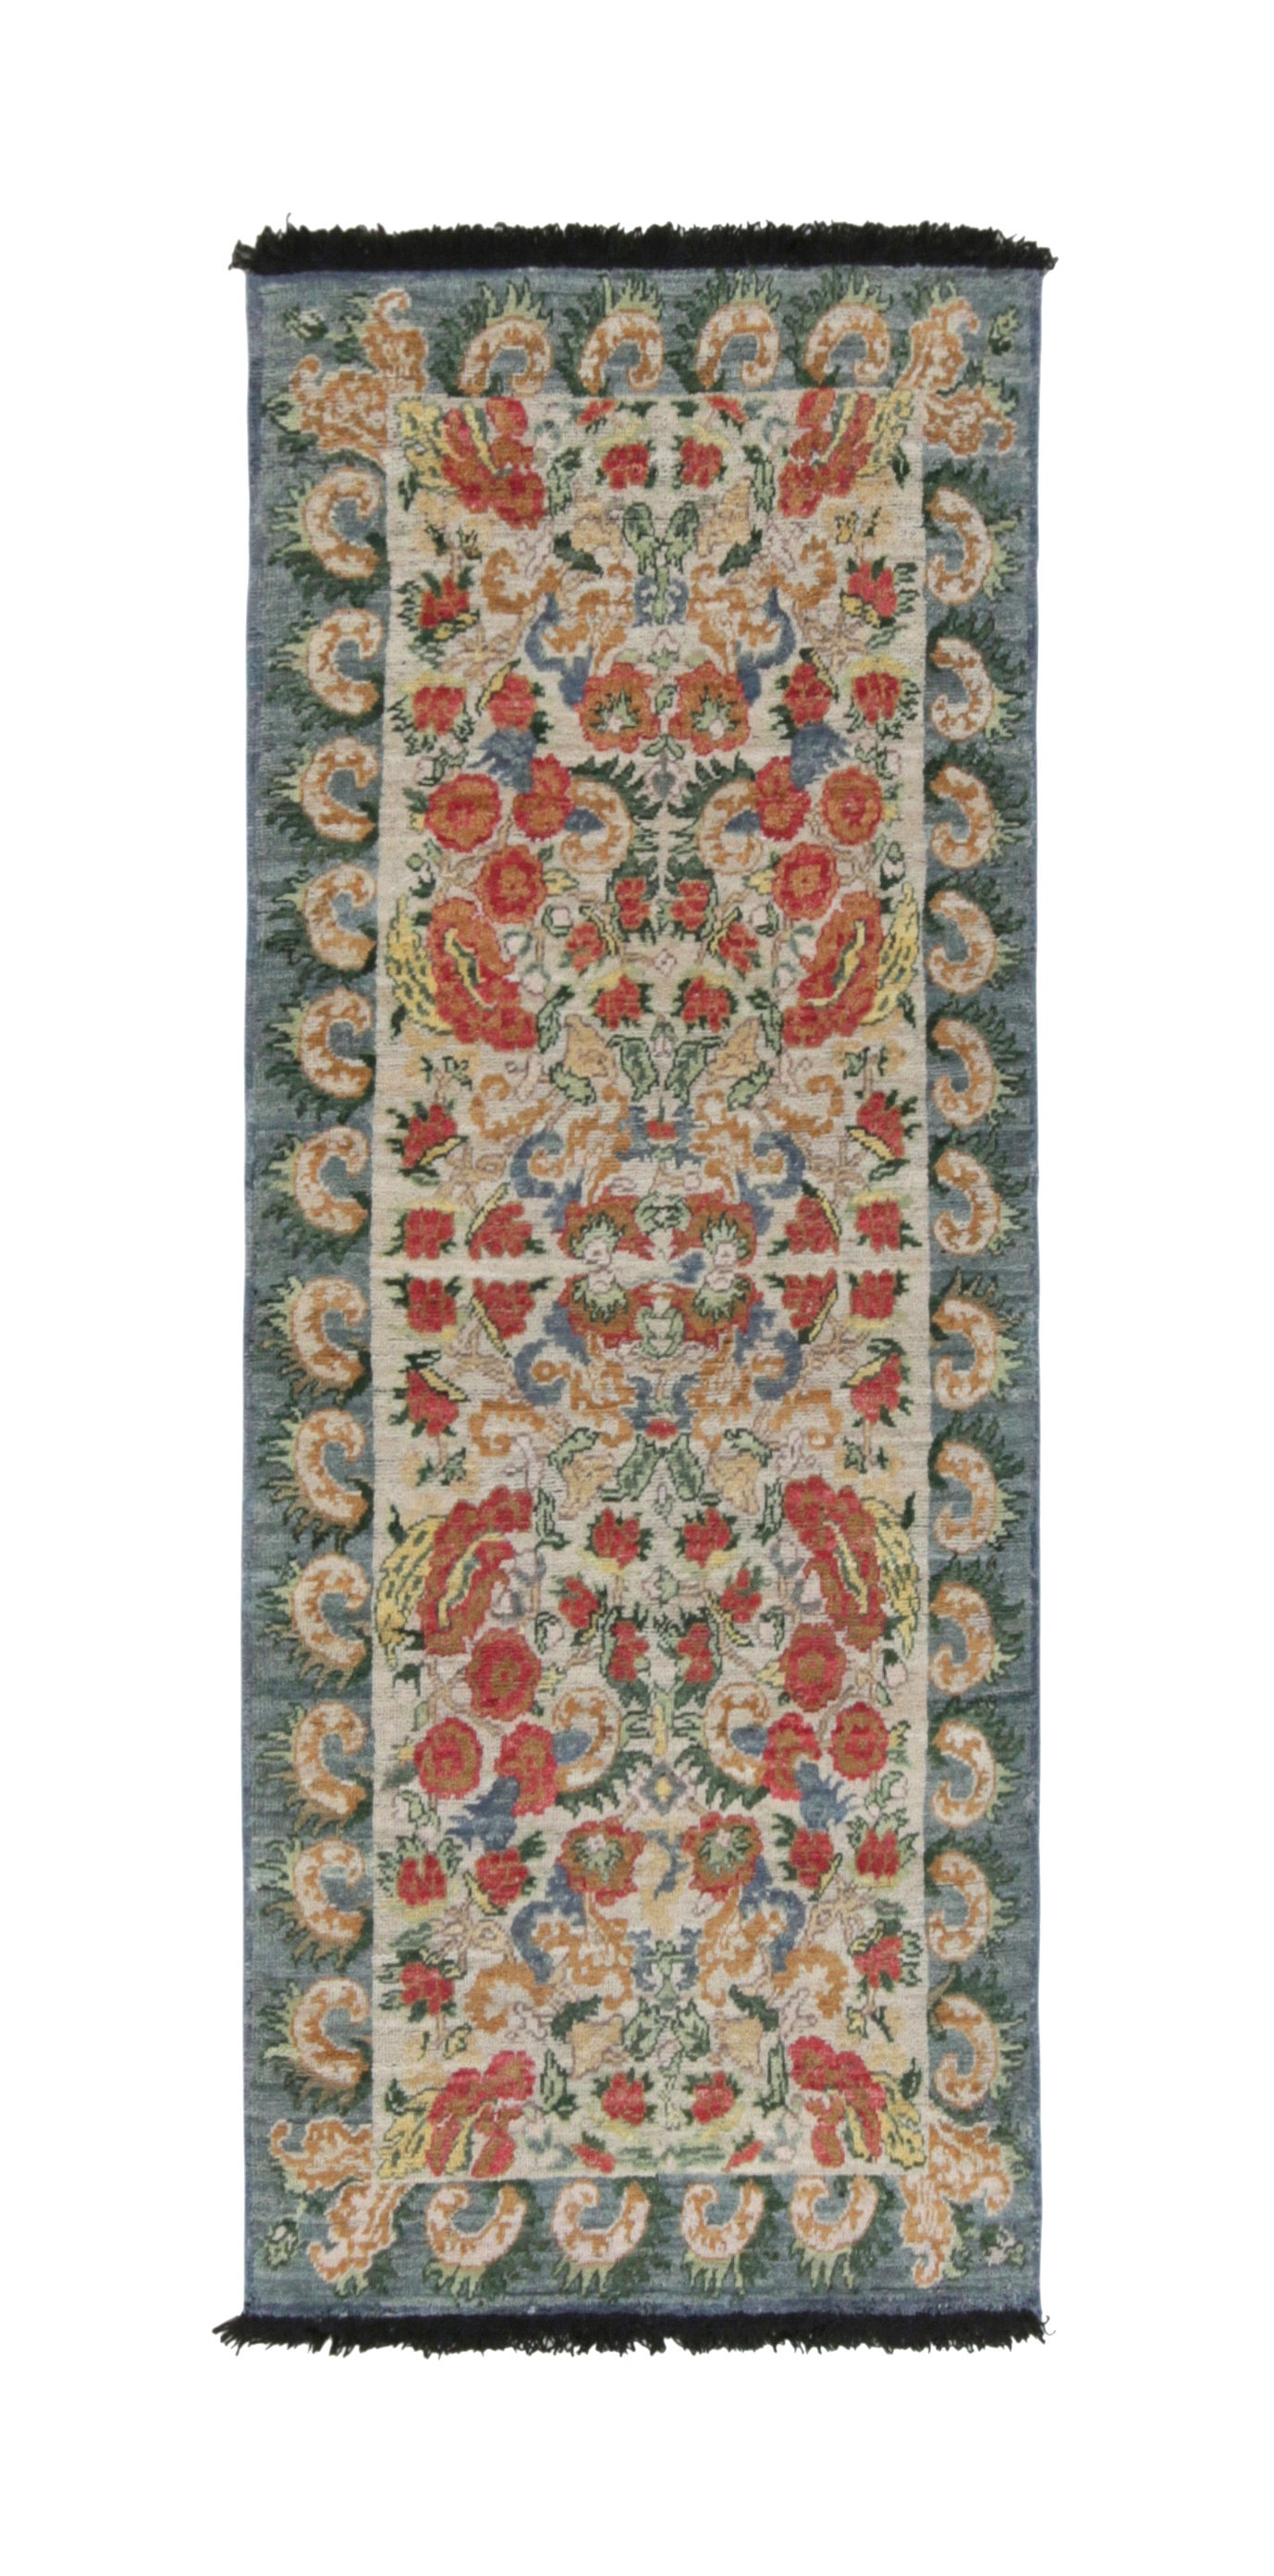 Rug & Kilim’s Classic Style Runner in Red Floral Patterns on Off-White For Sale